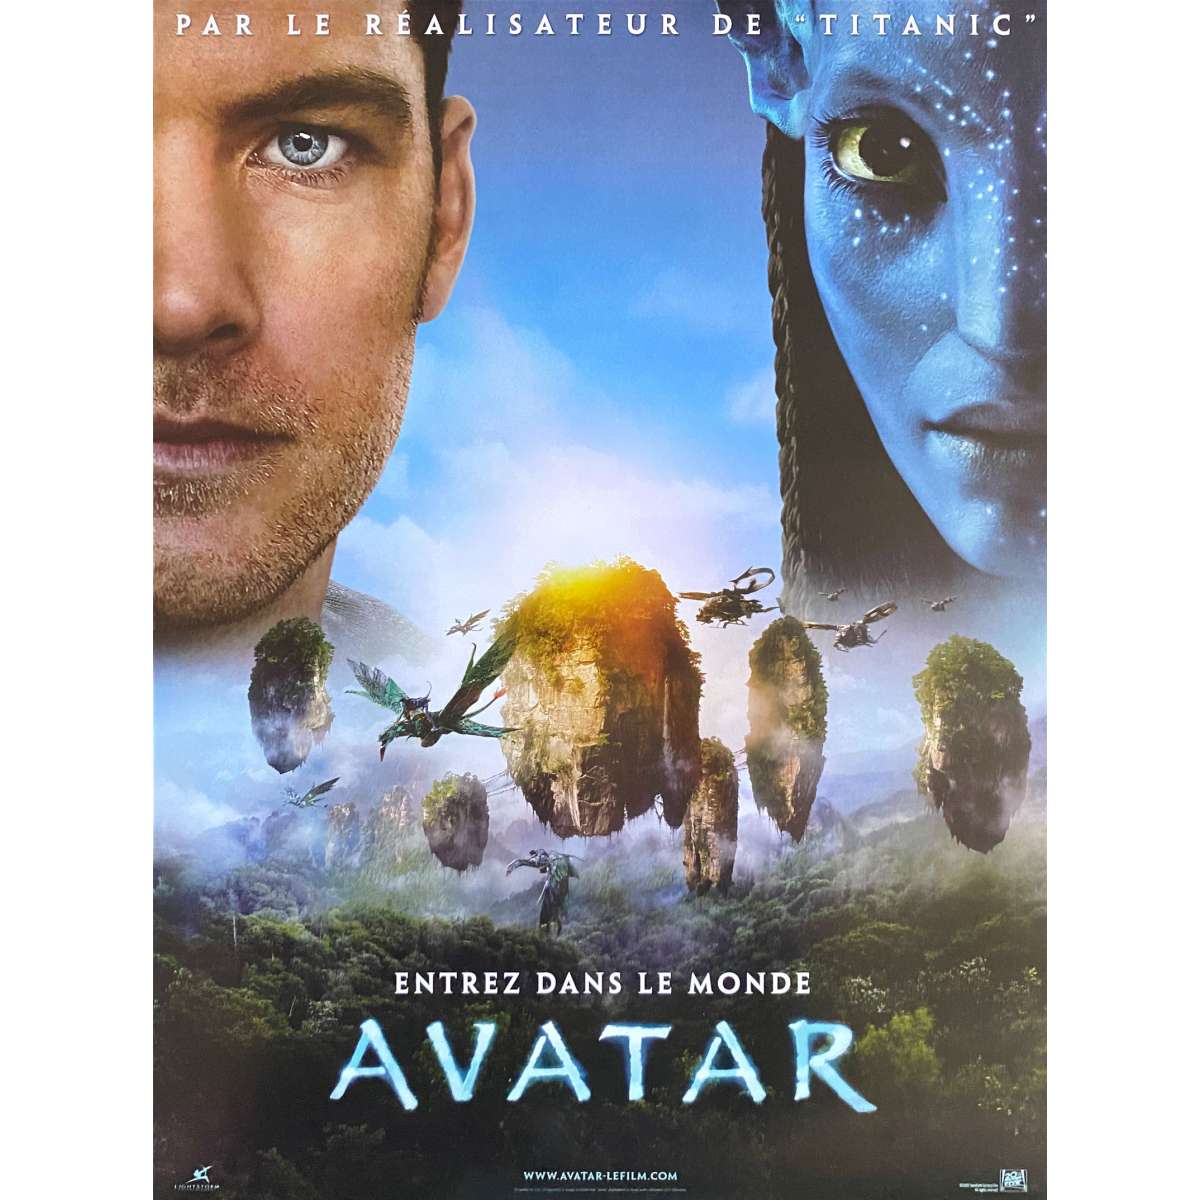 Avatar  The Way of Water  2022  Original Movie Poster  Art of the Movies